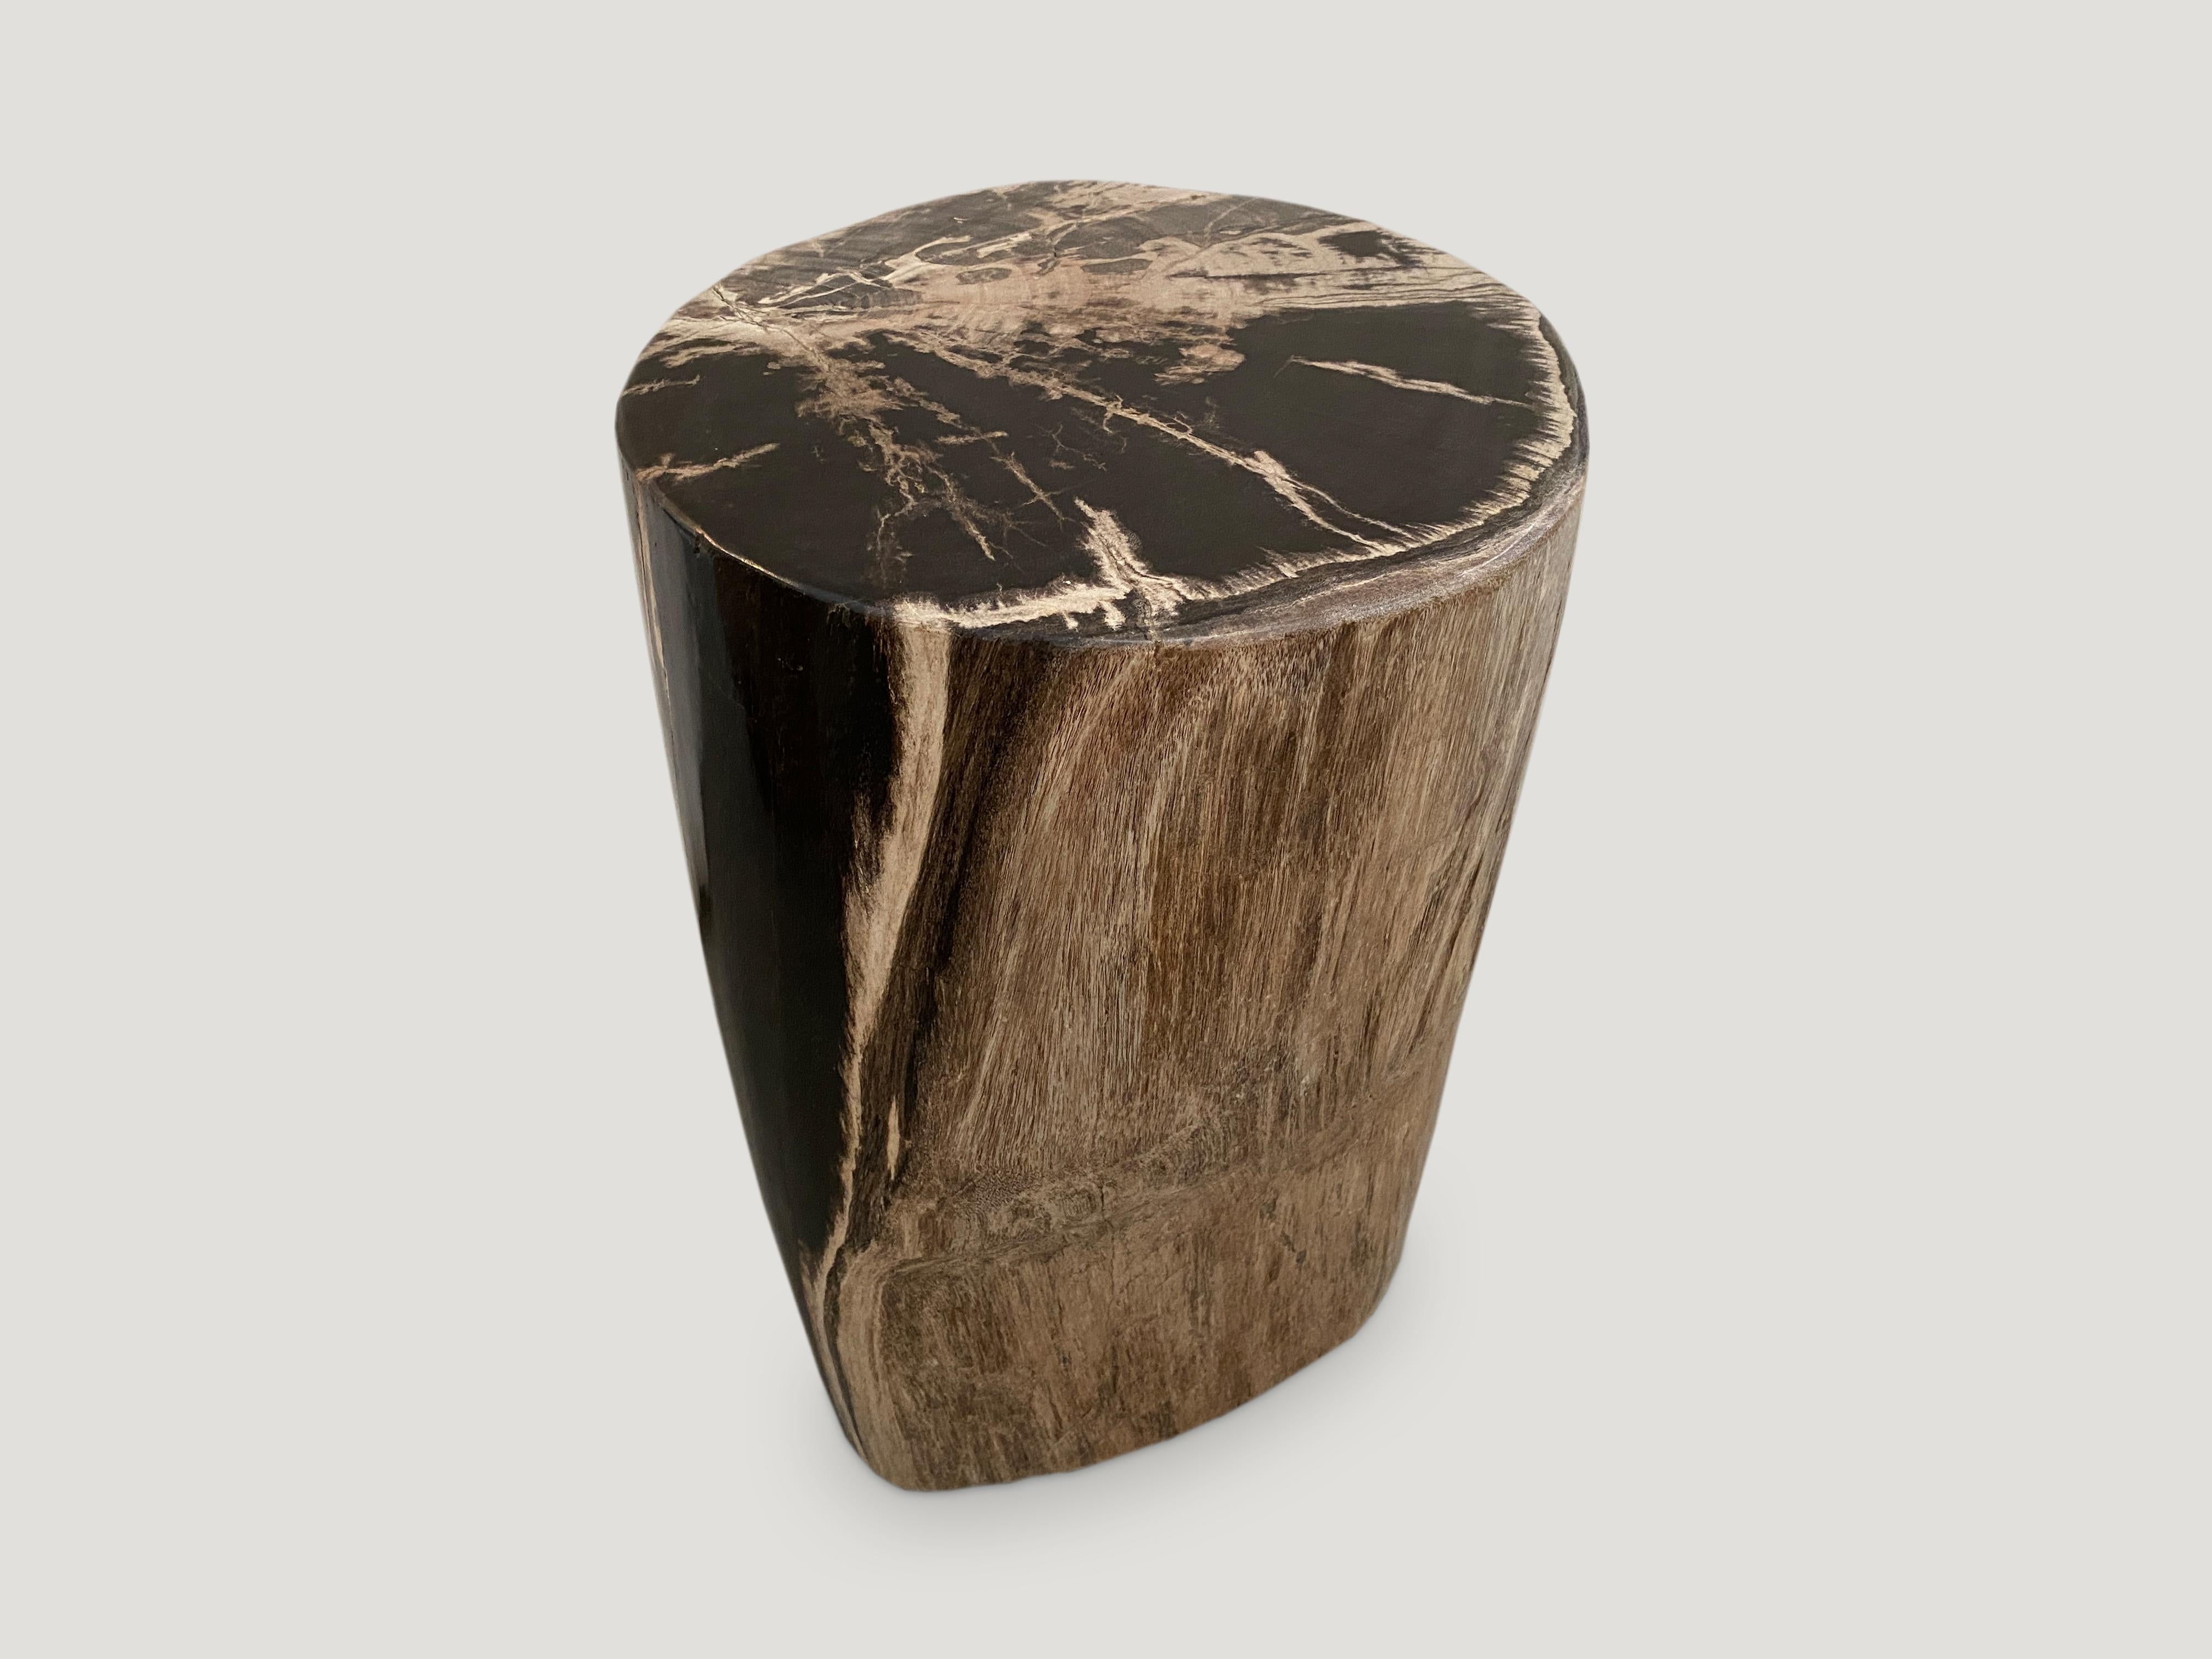 Stunning earth tones on this high quality petrified wood side table. It’s fascinating how Mother Nature produces these exquisite 40 million year old petrified teak logs with such contrasting colors with natural patterns throughout. Modern yet with